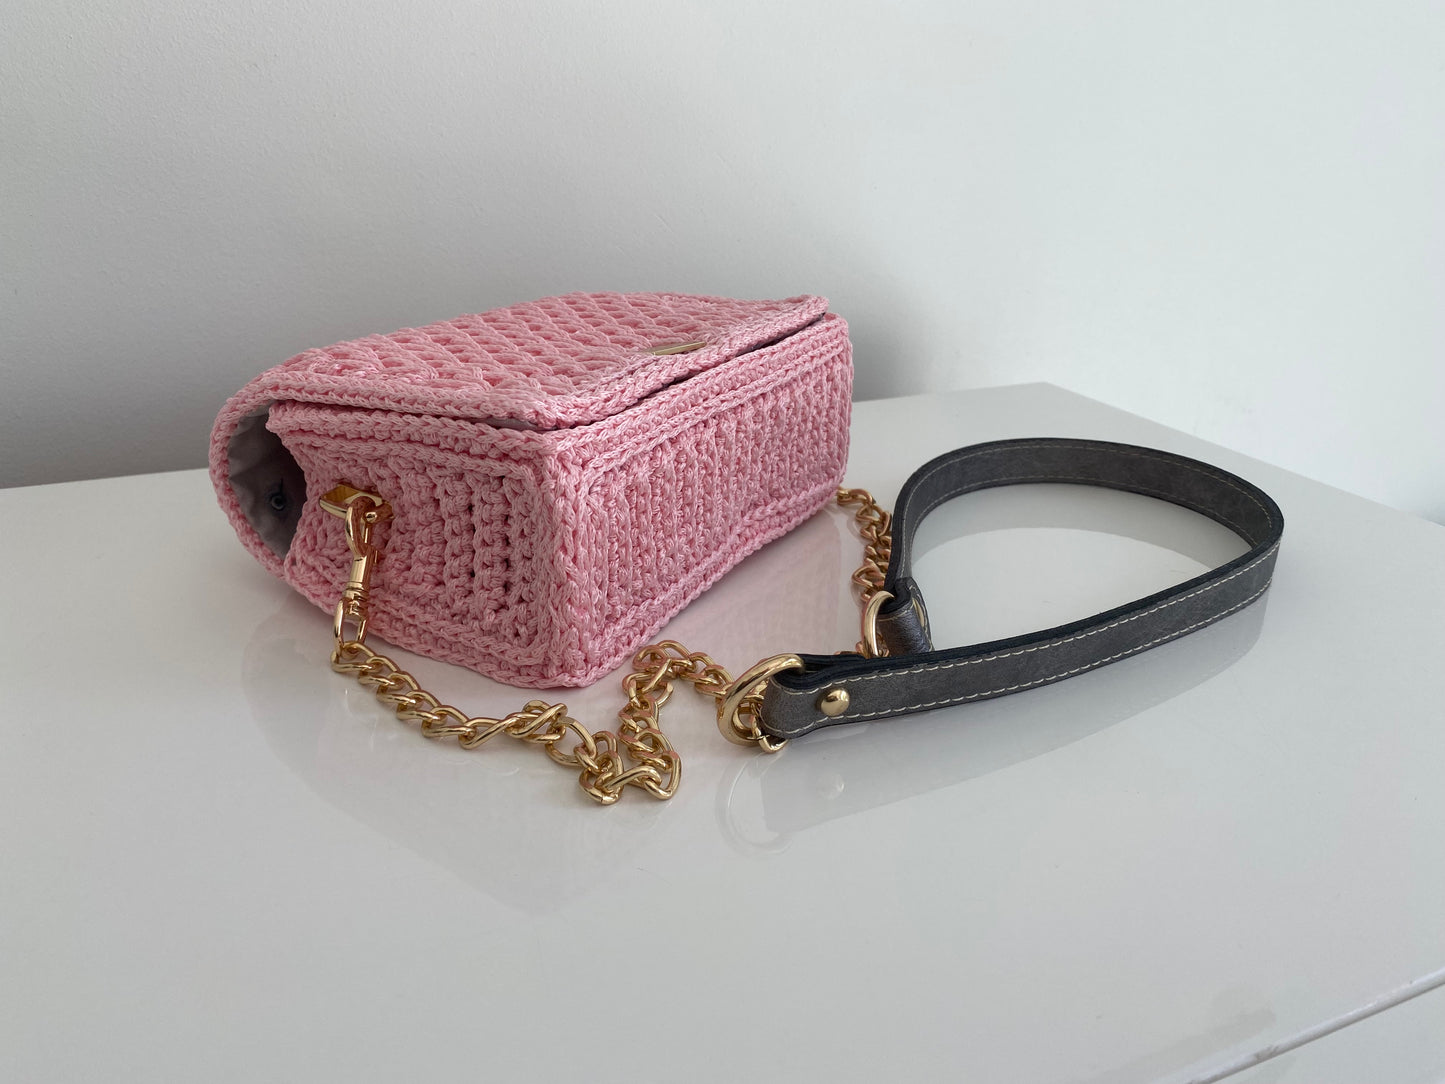 Charming pink colour mini handbag with long gold metal / ECO leather combination chain